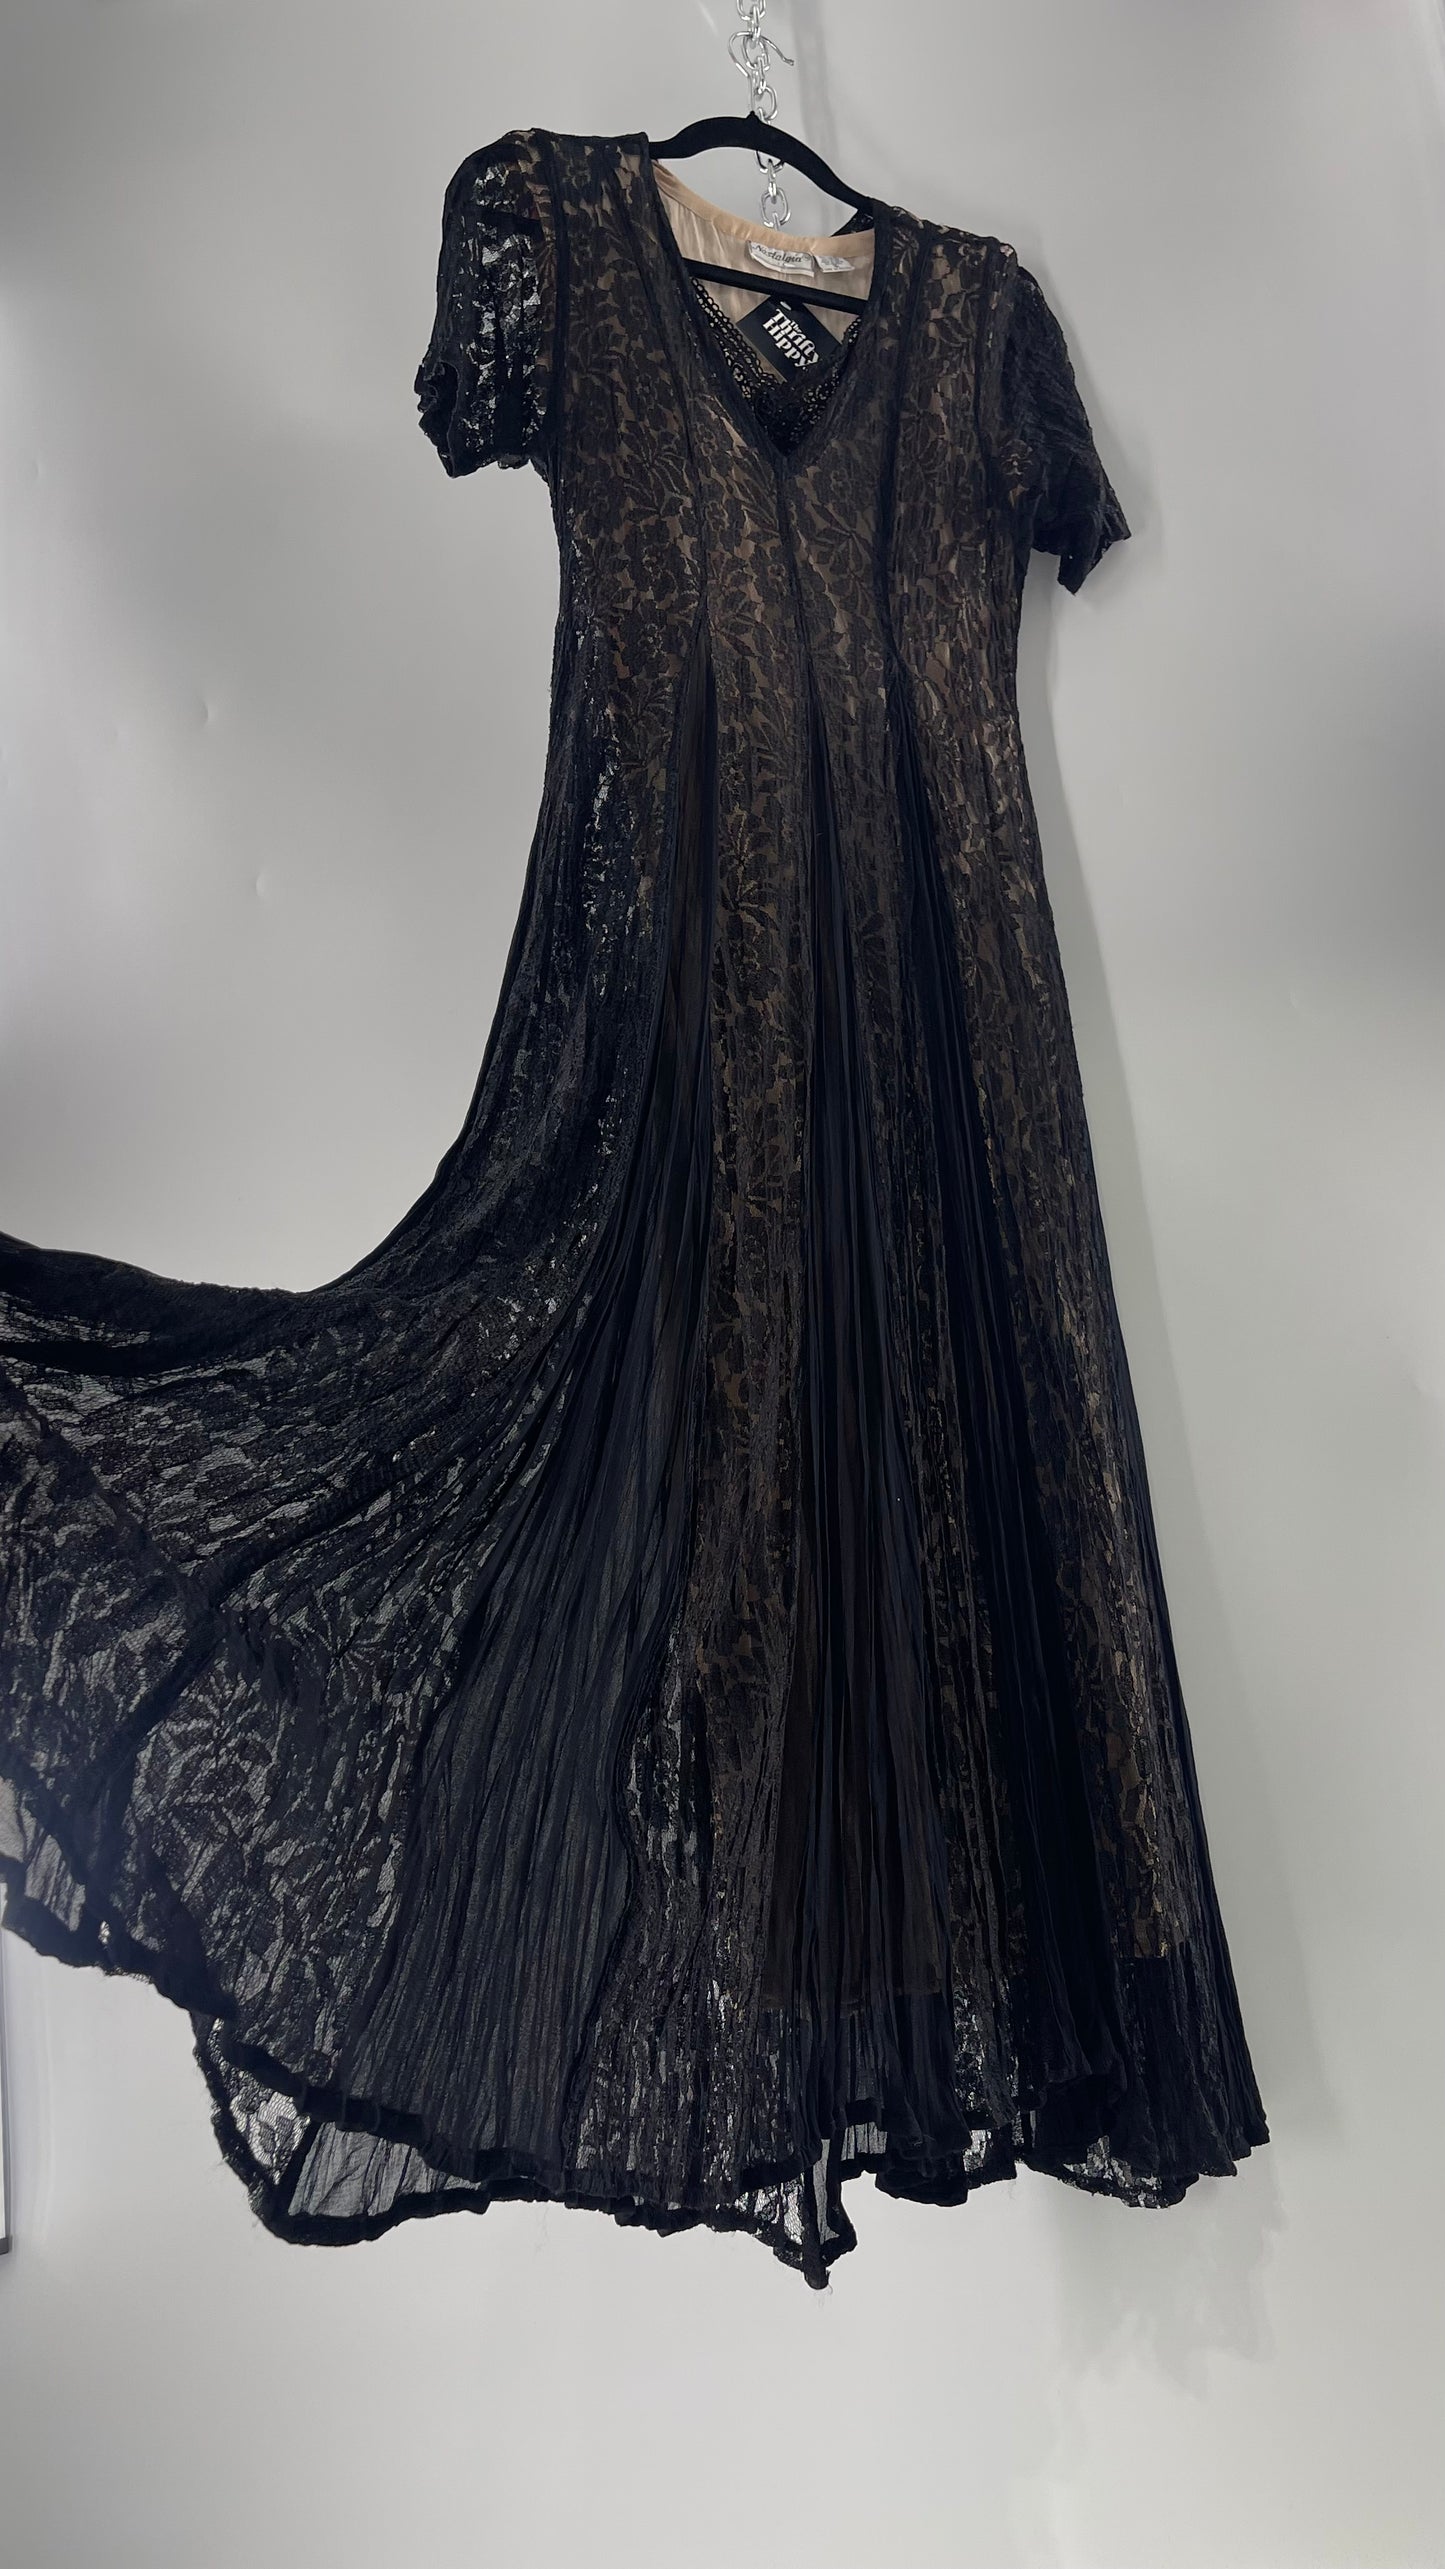 Nostalgia Vintage Black Lace Gown with Pleated Vents and Beige Underlay (Small)